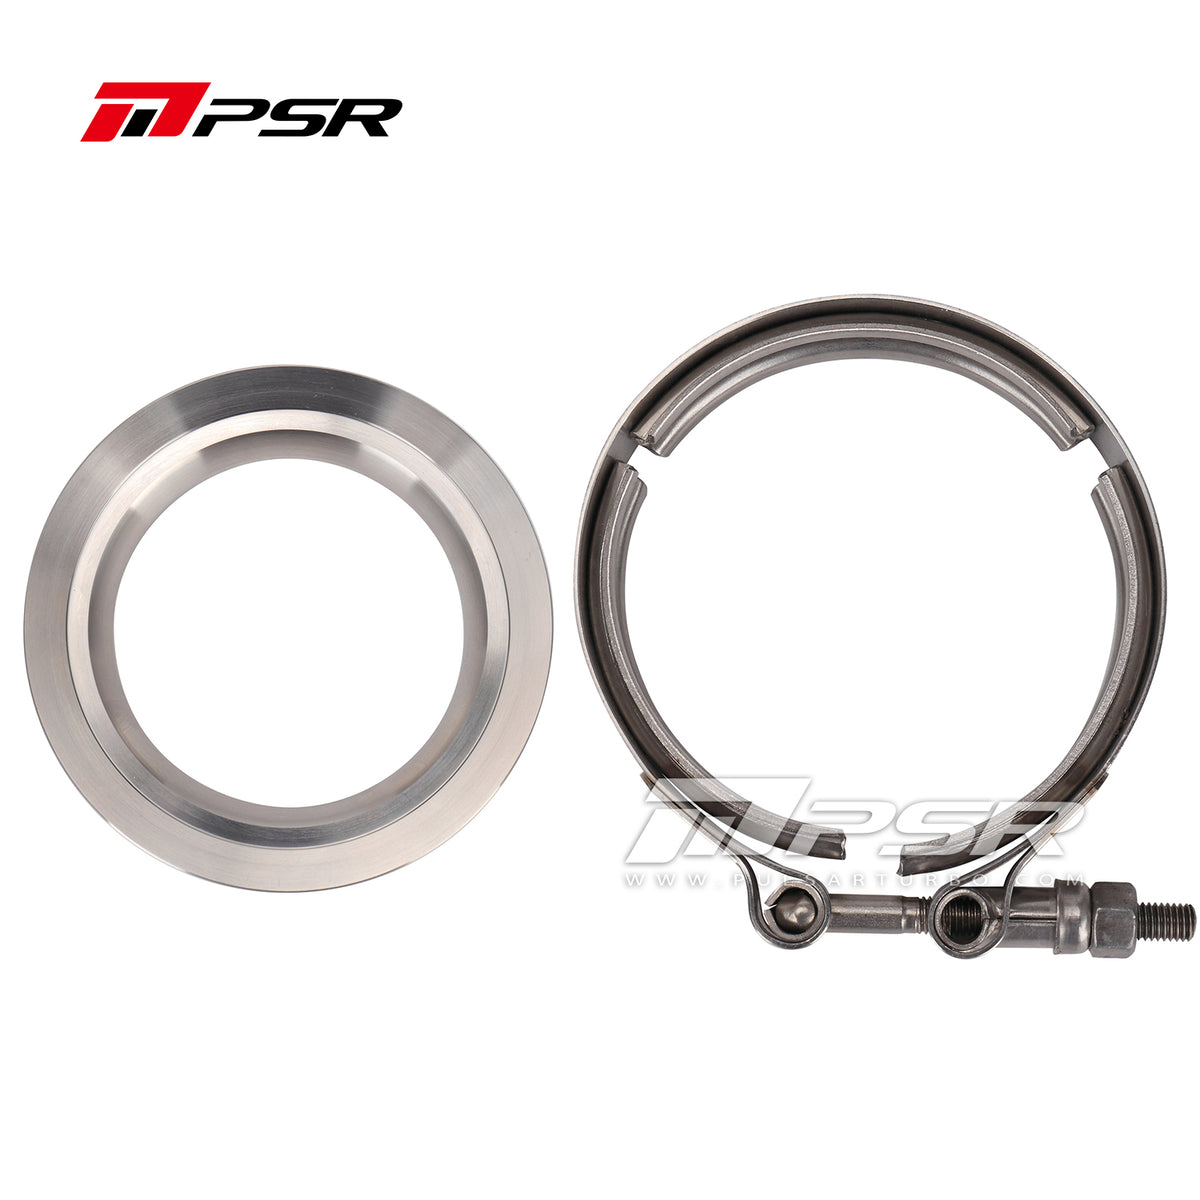 PULSAR S300 T4 Turbo 3″ Stainless Steel Flange Clamp Kit